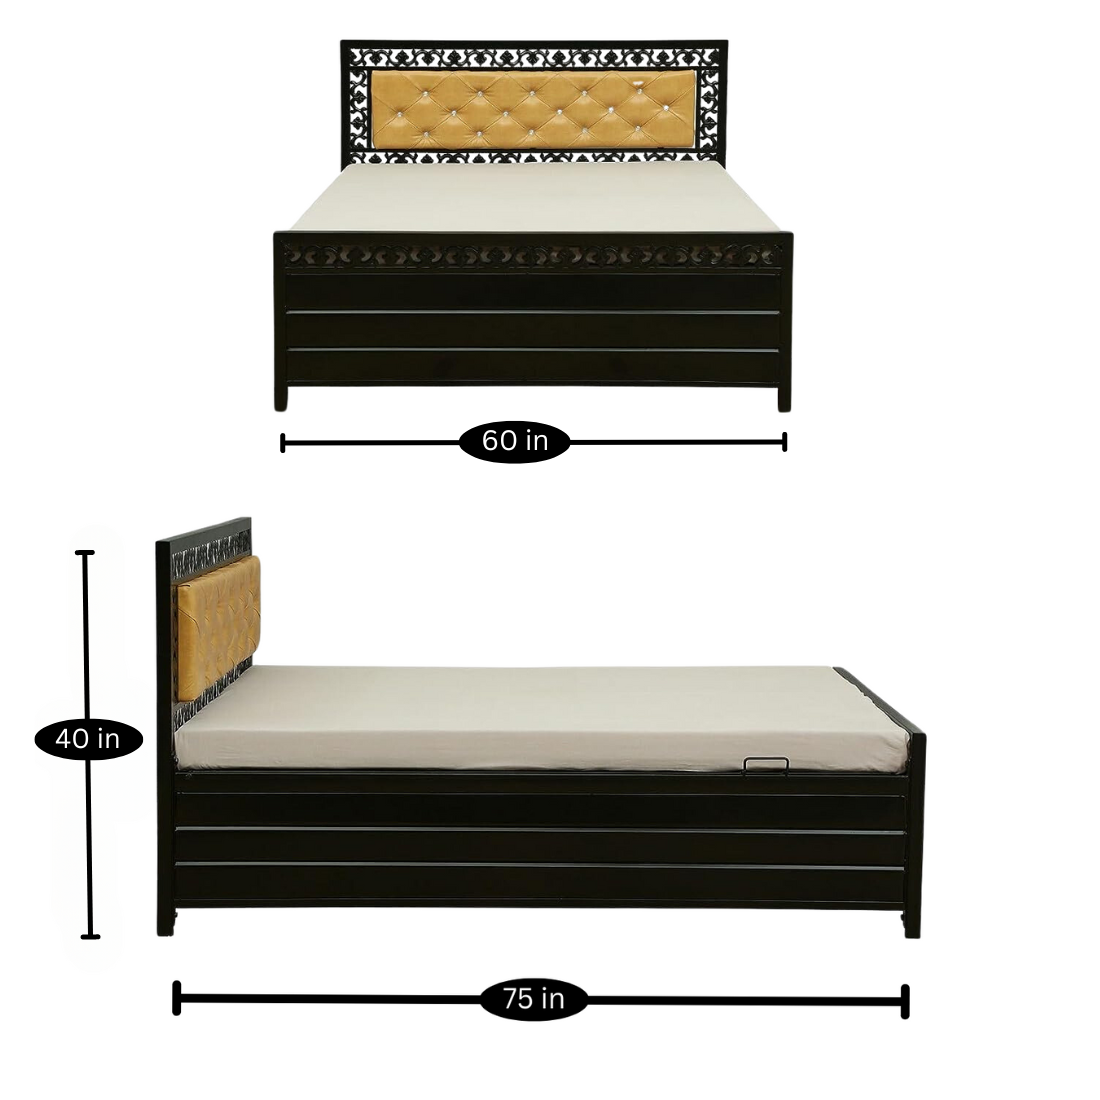 Cuba Hydraulic Storage Queen Metal Bed with Golden Cushion Headrest (Color - Black)